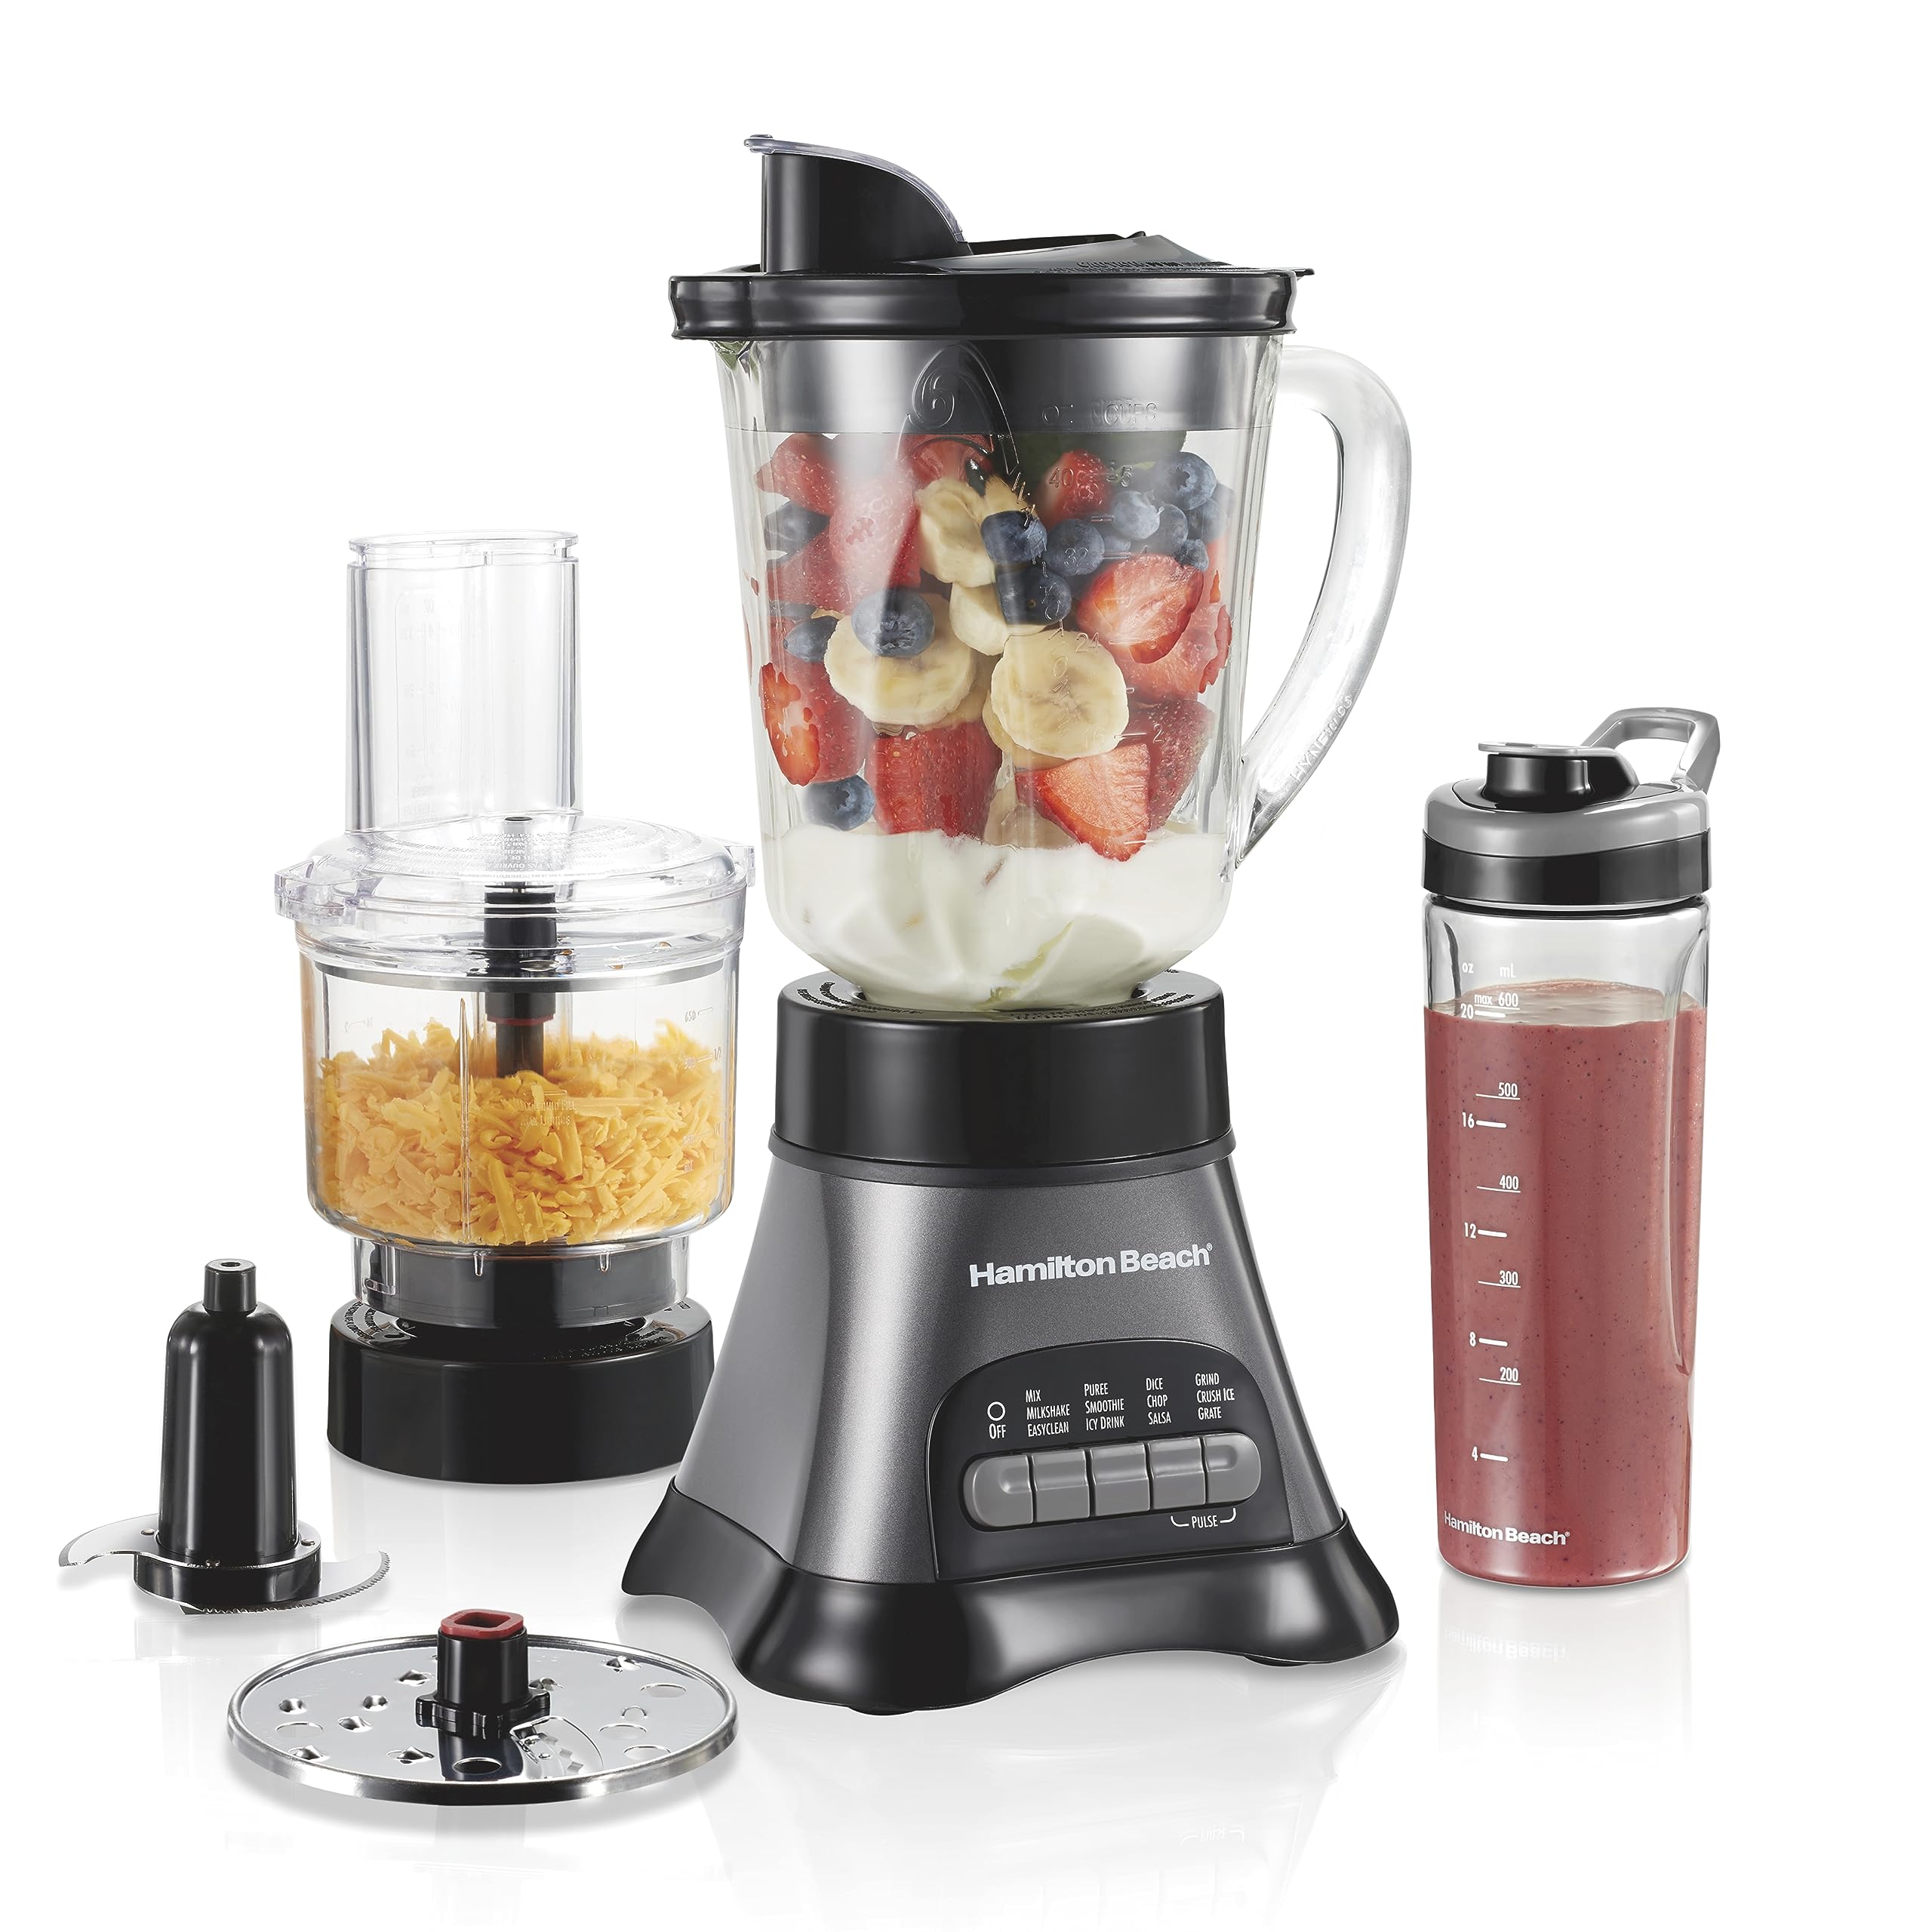 Hamilton Beach Blender for Shakes and Smoothies & Food Processor Combo, With 40oz Glass Jar, Portable Blend-In Travel Cup & 3 Cup Electric Food Chopper Attachment, 700 Watts, Gray & Black (58163)